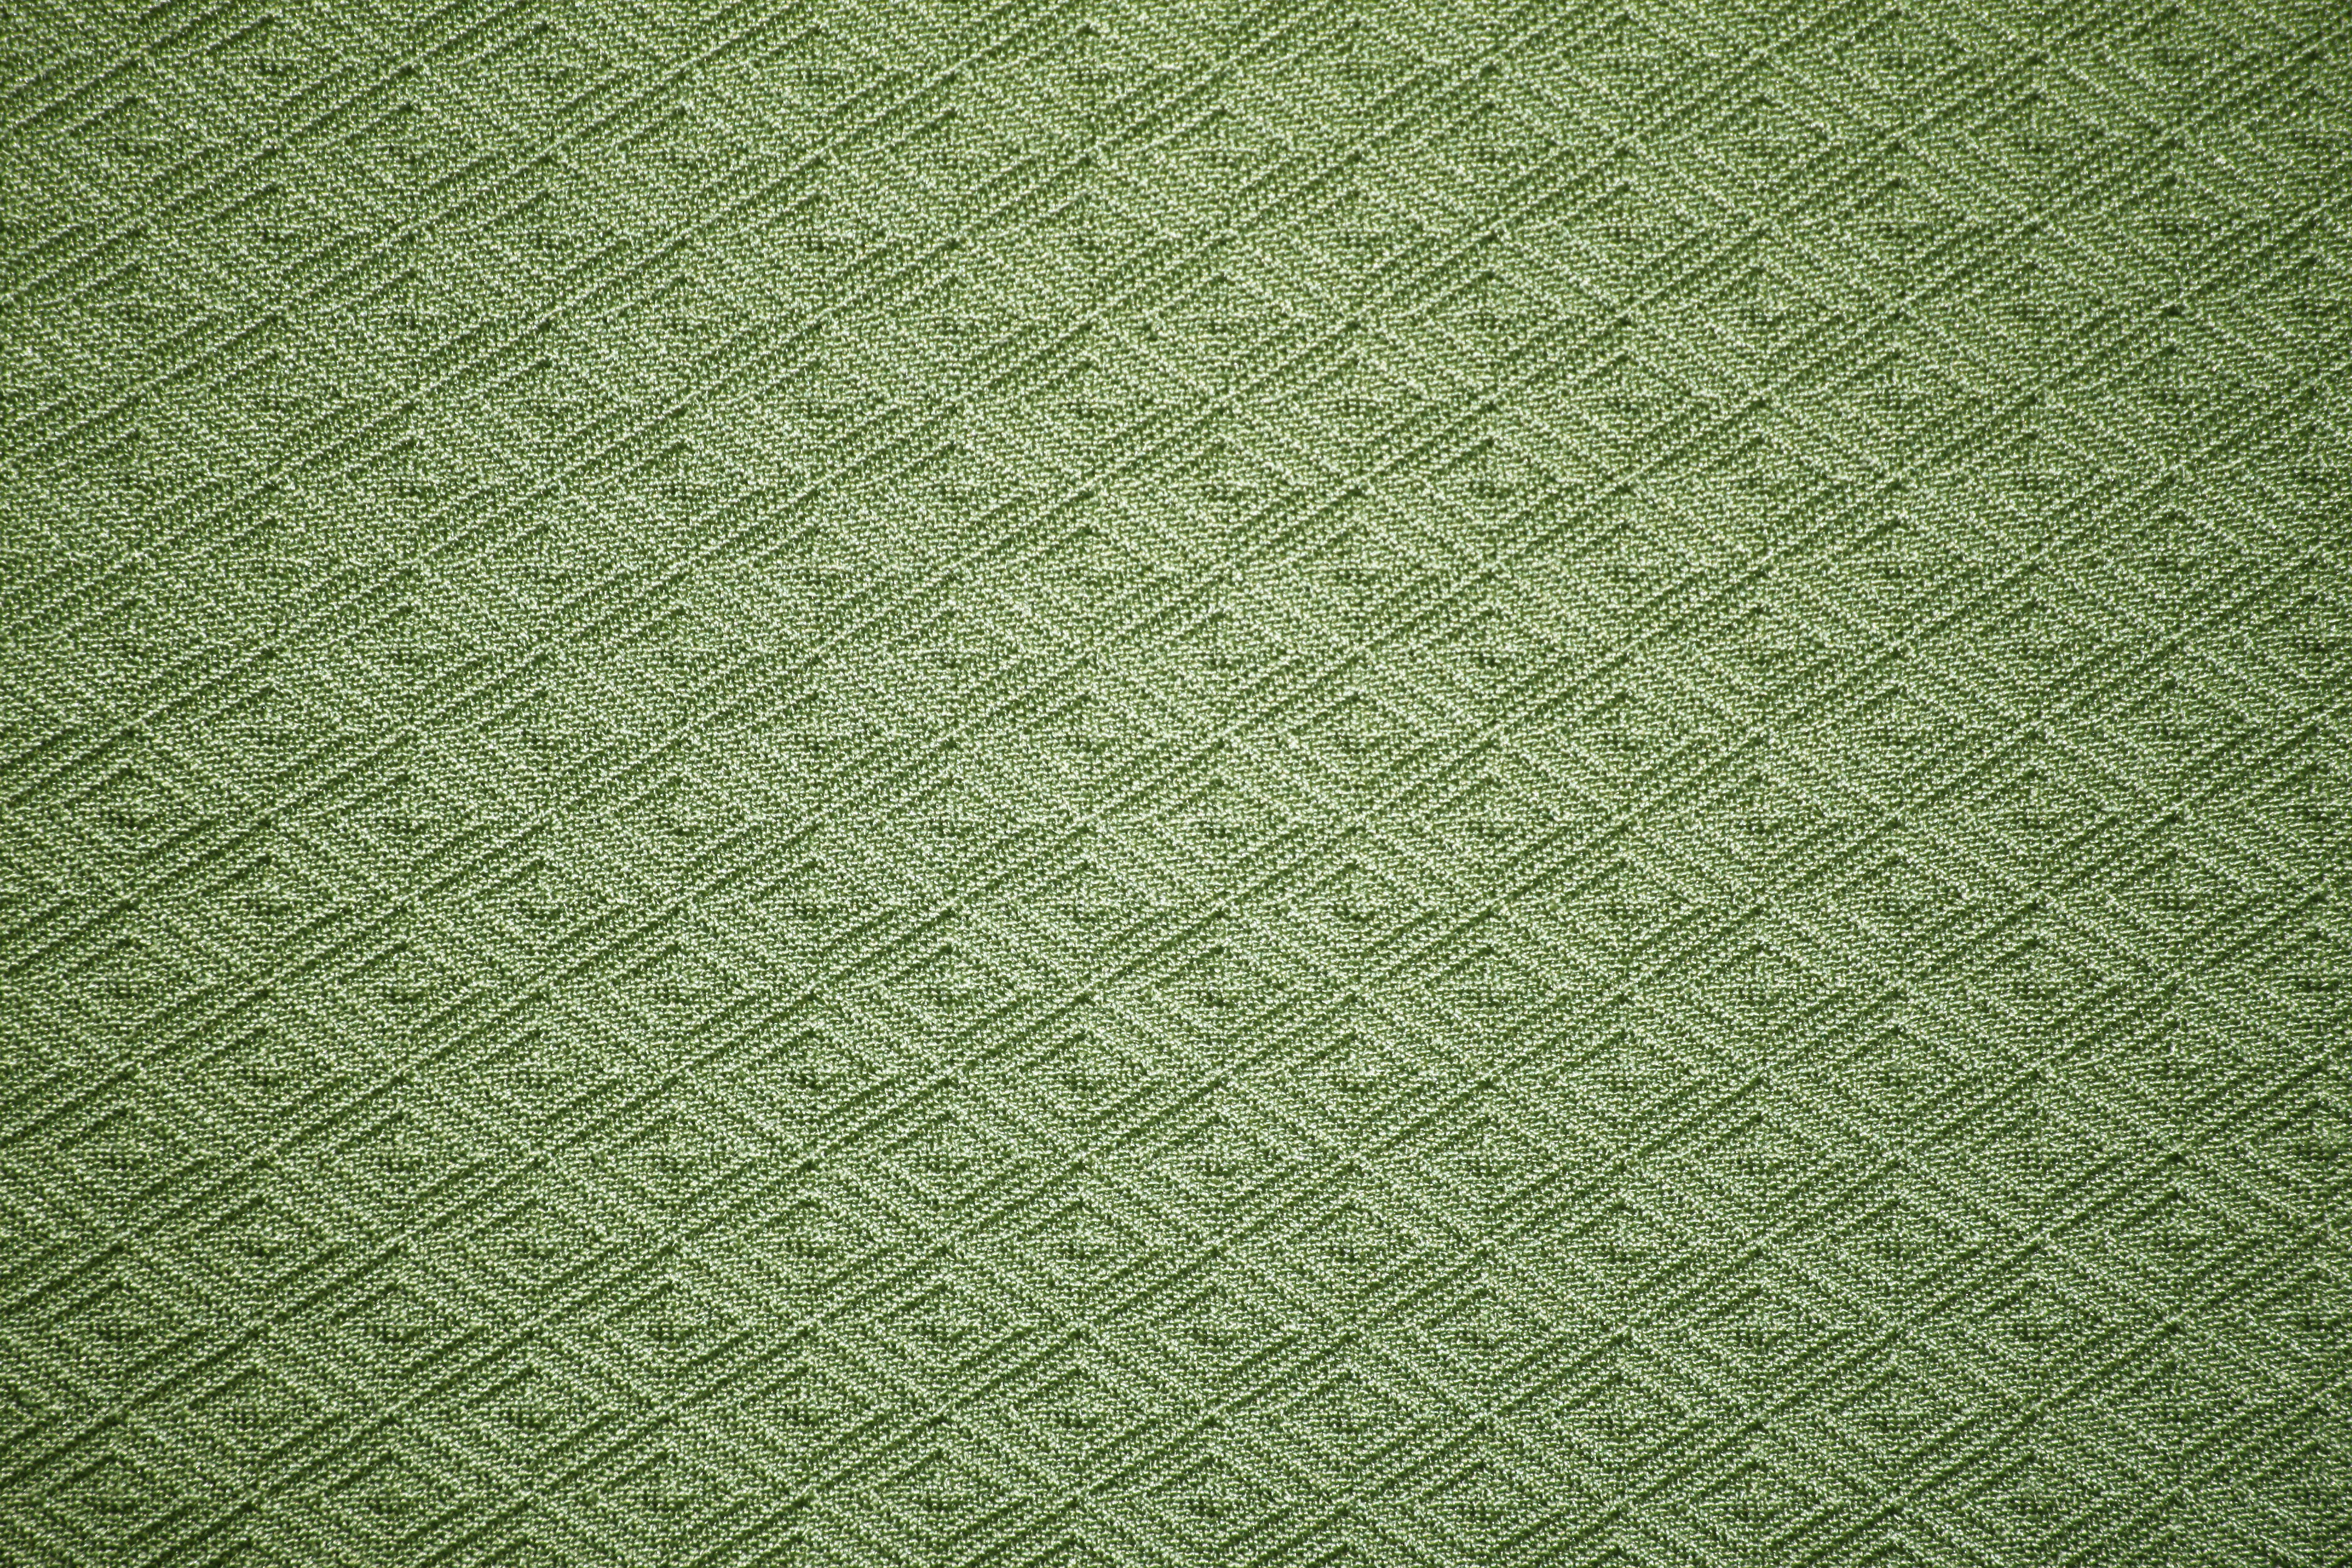 Olive Green Knit Fabric With Diamond Pattern Texture Picture